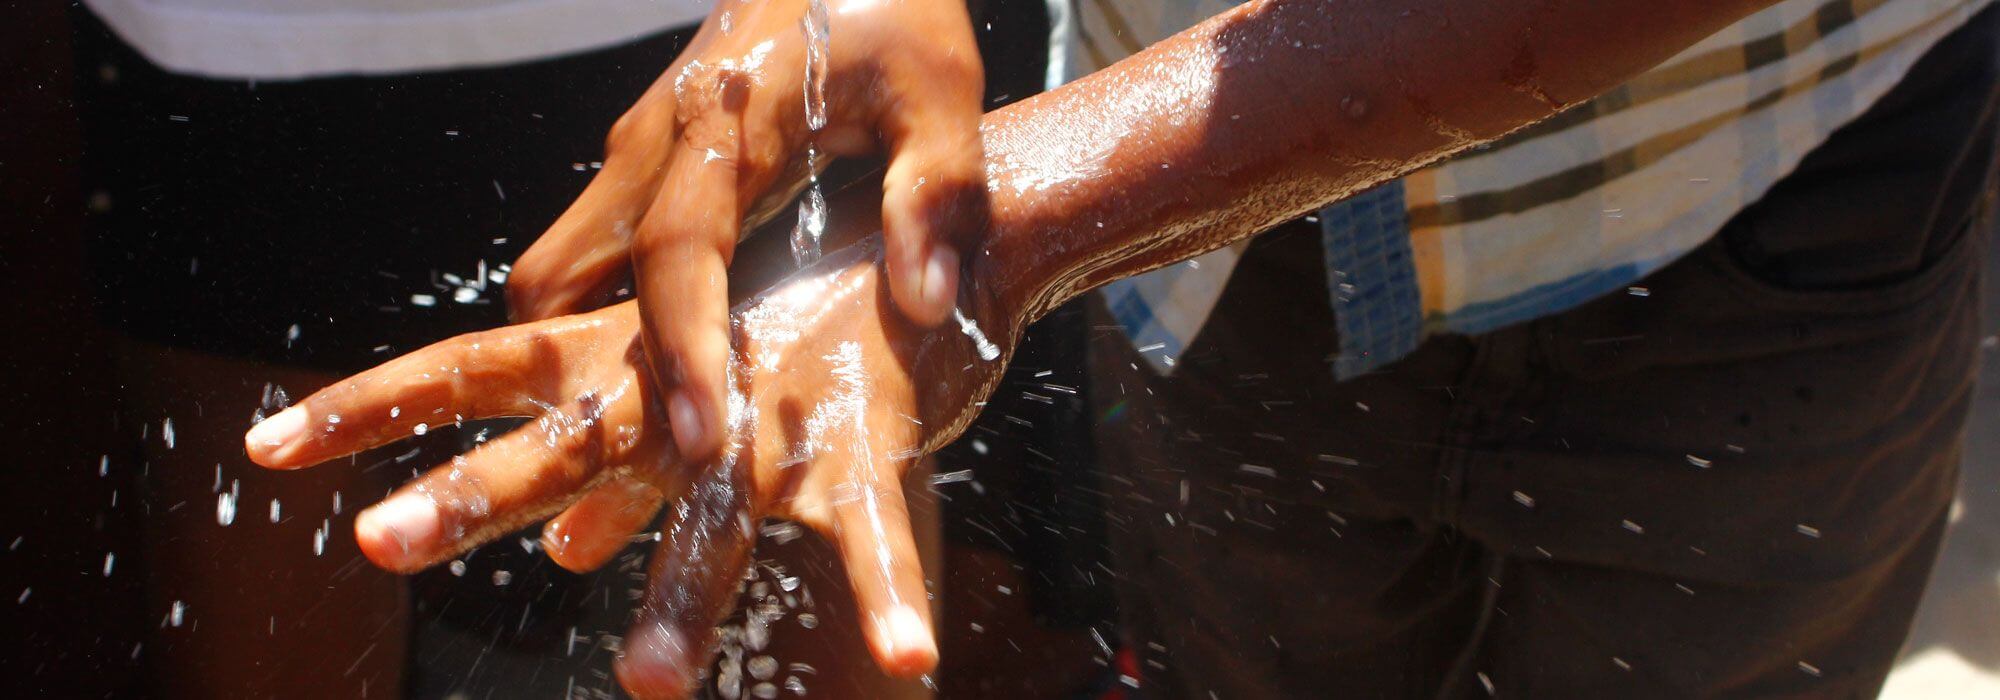 A young man washing his hands with water and soap